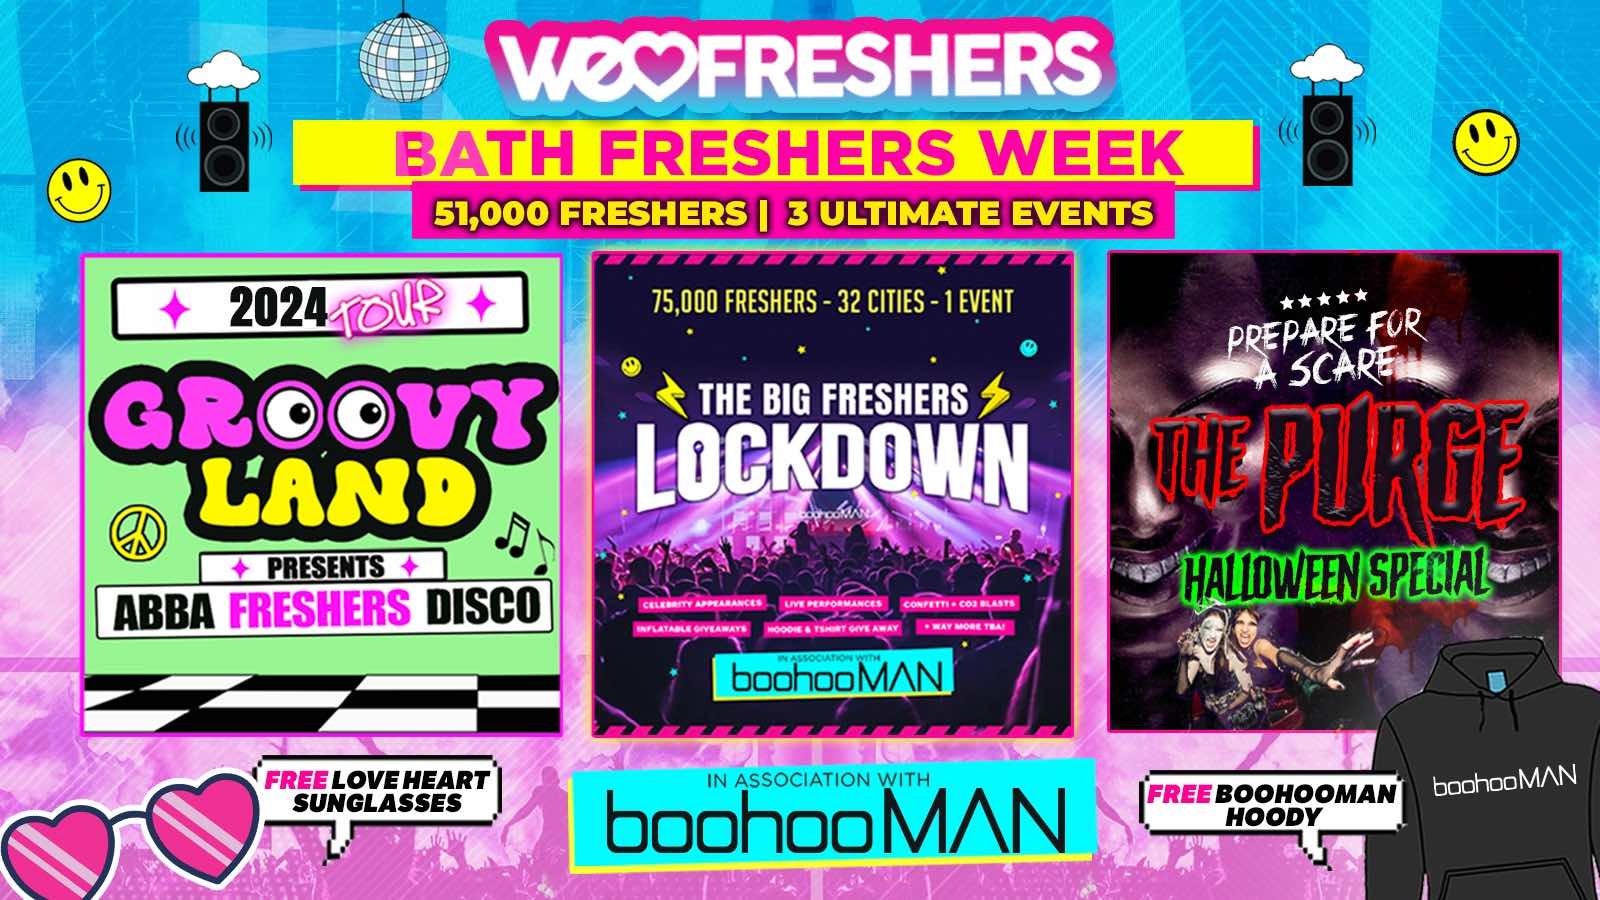 WE LOVE BATH FRESHERS 2024 in association with boohooMAN  – ❗ 3 EVENTS❗